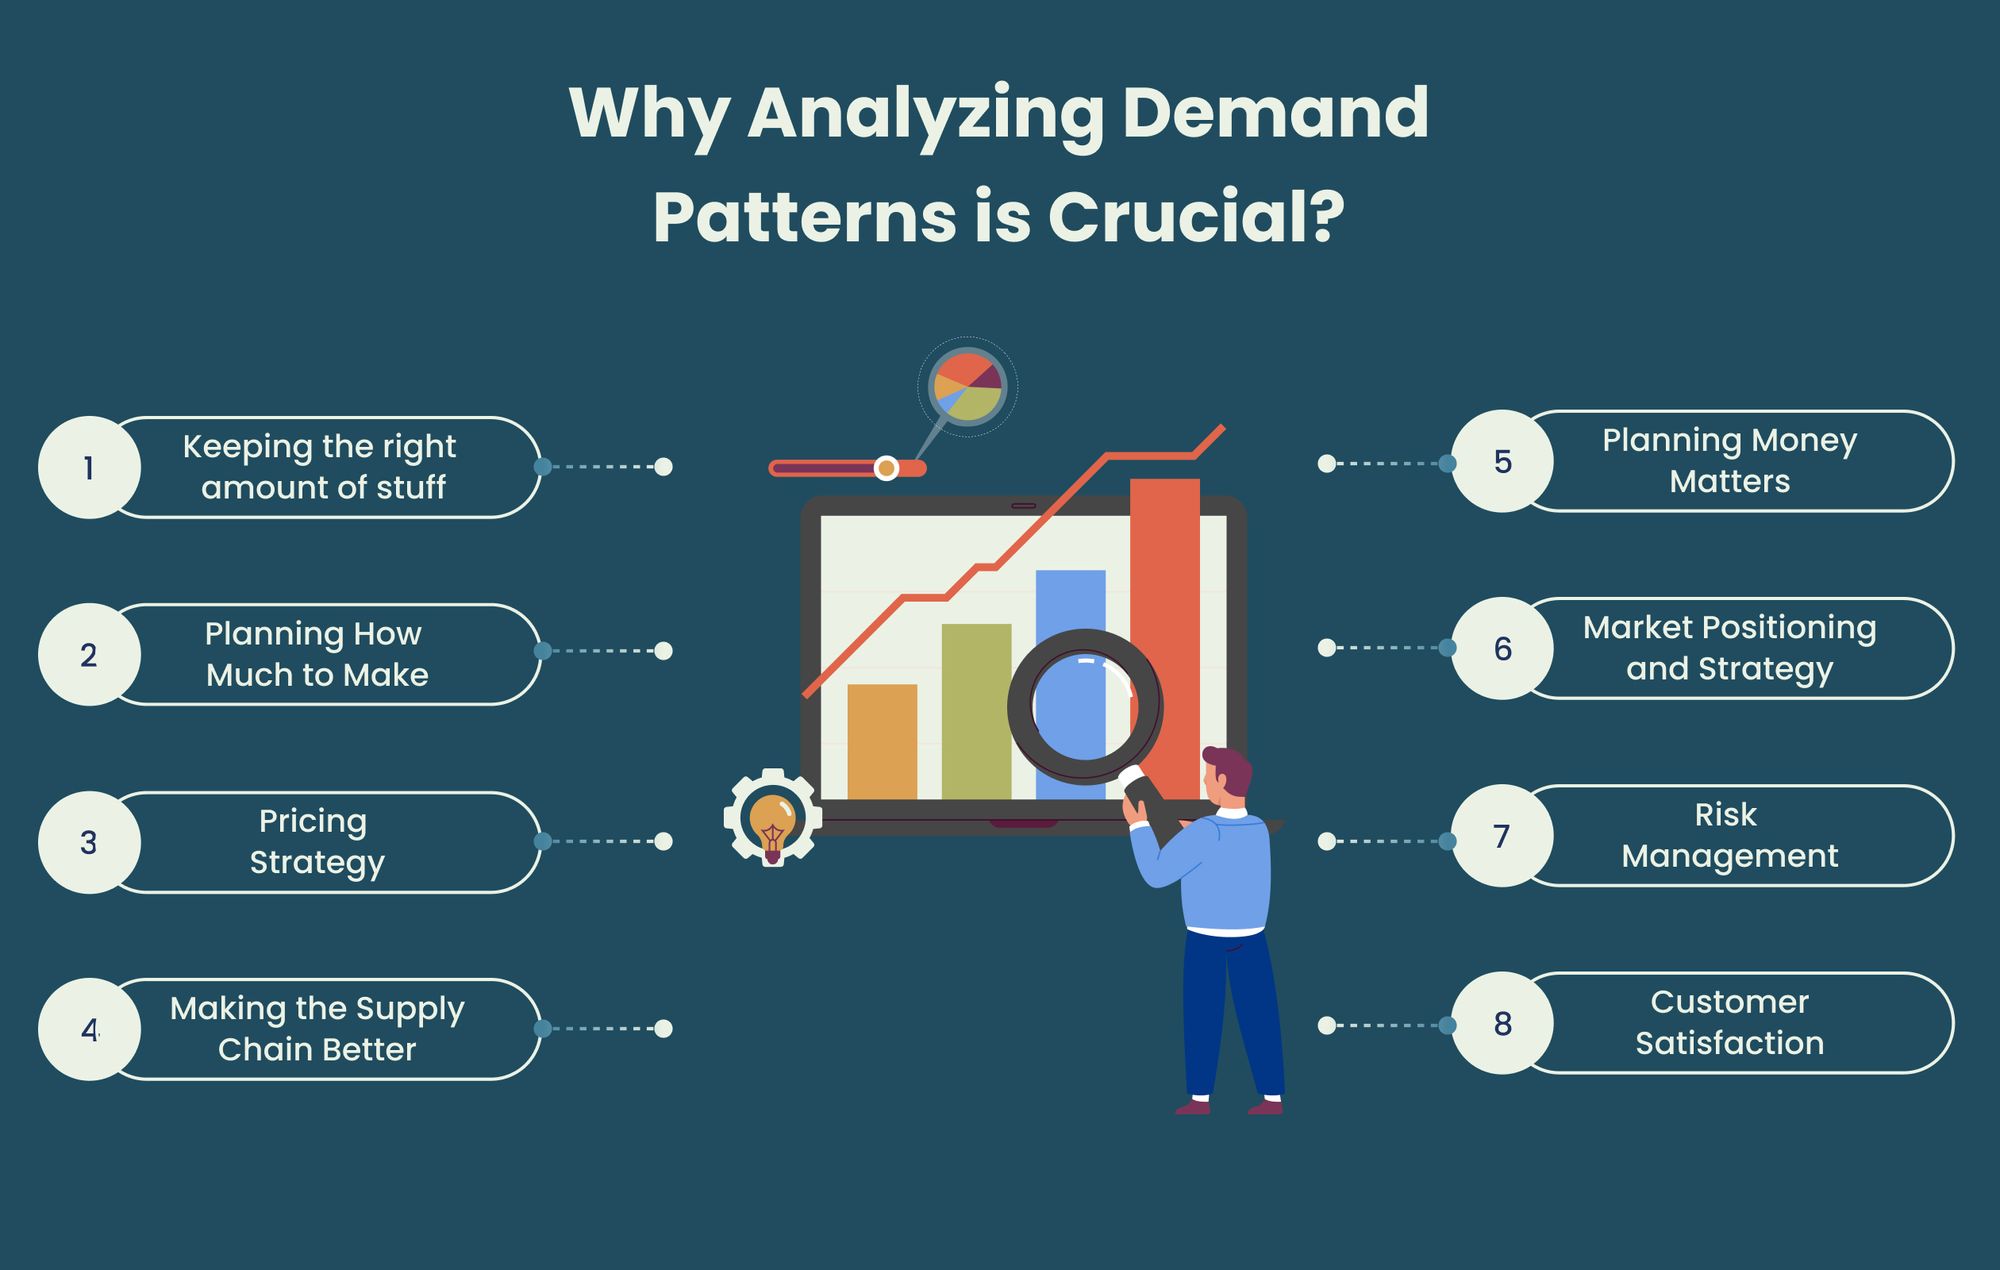 Why Analyzing Demand Patterns is Crucial?